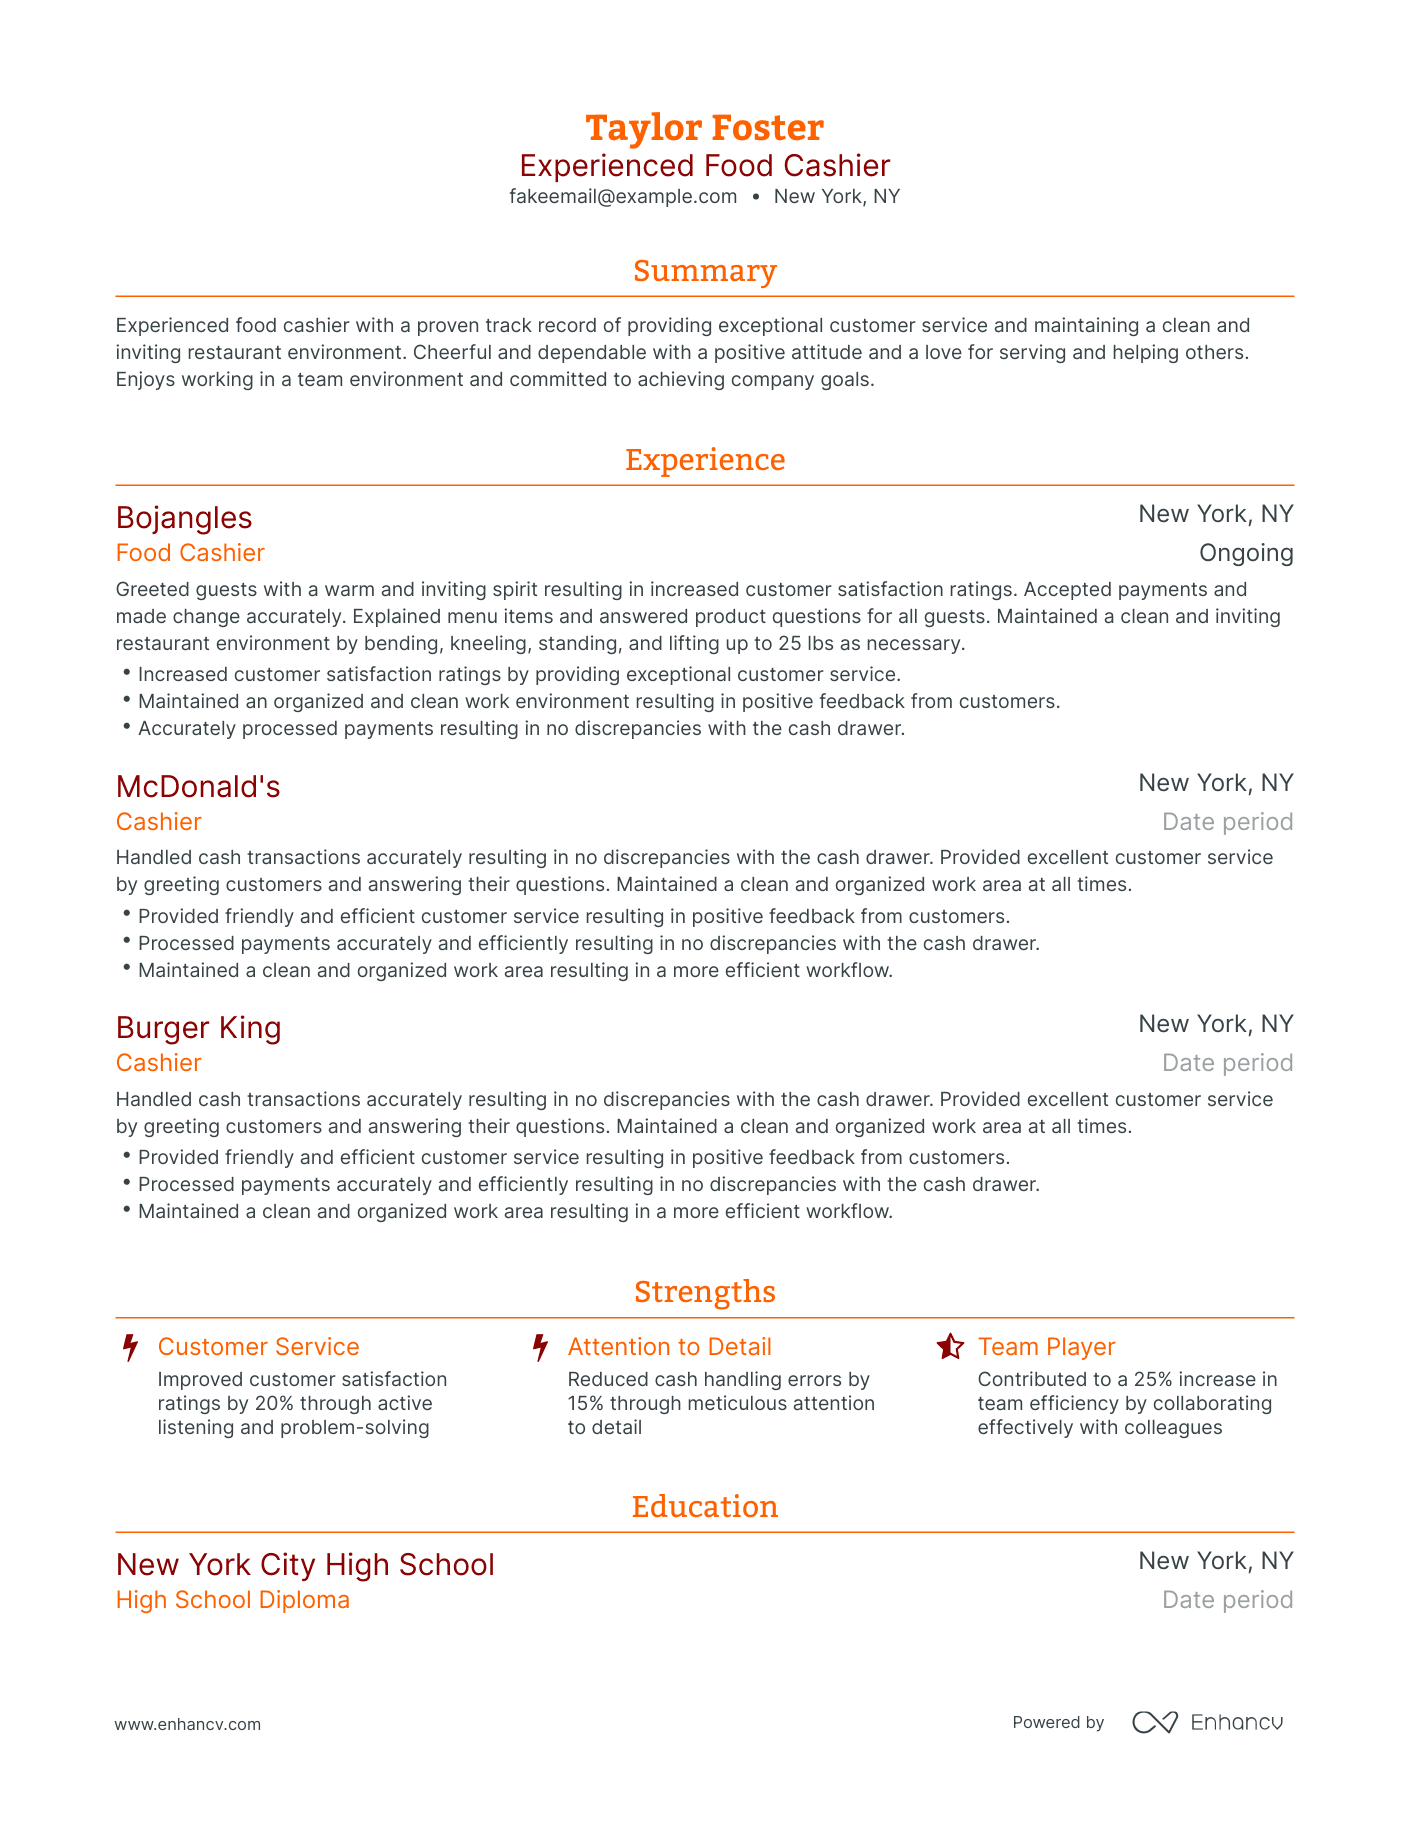 Traditional Food Cashier Resume Template